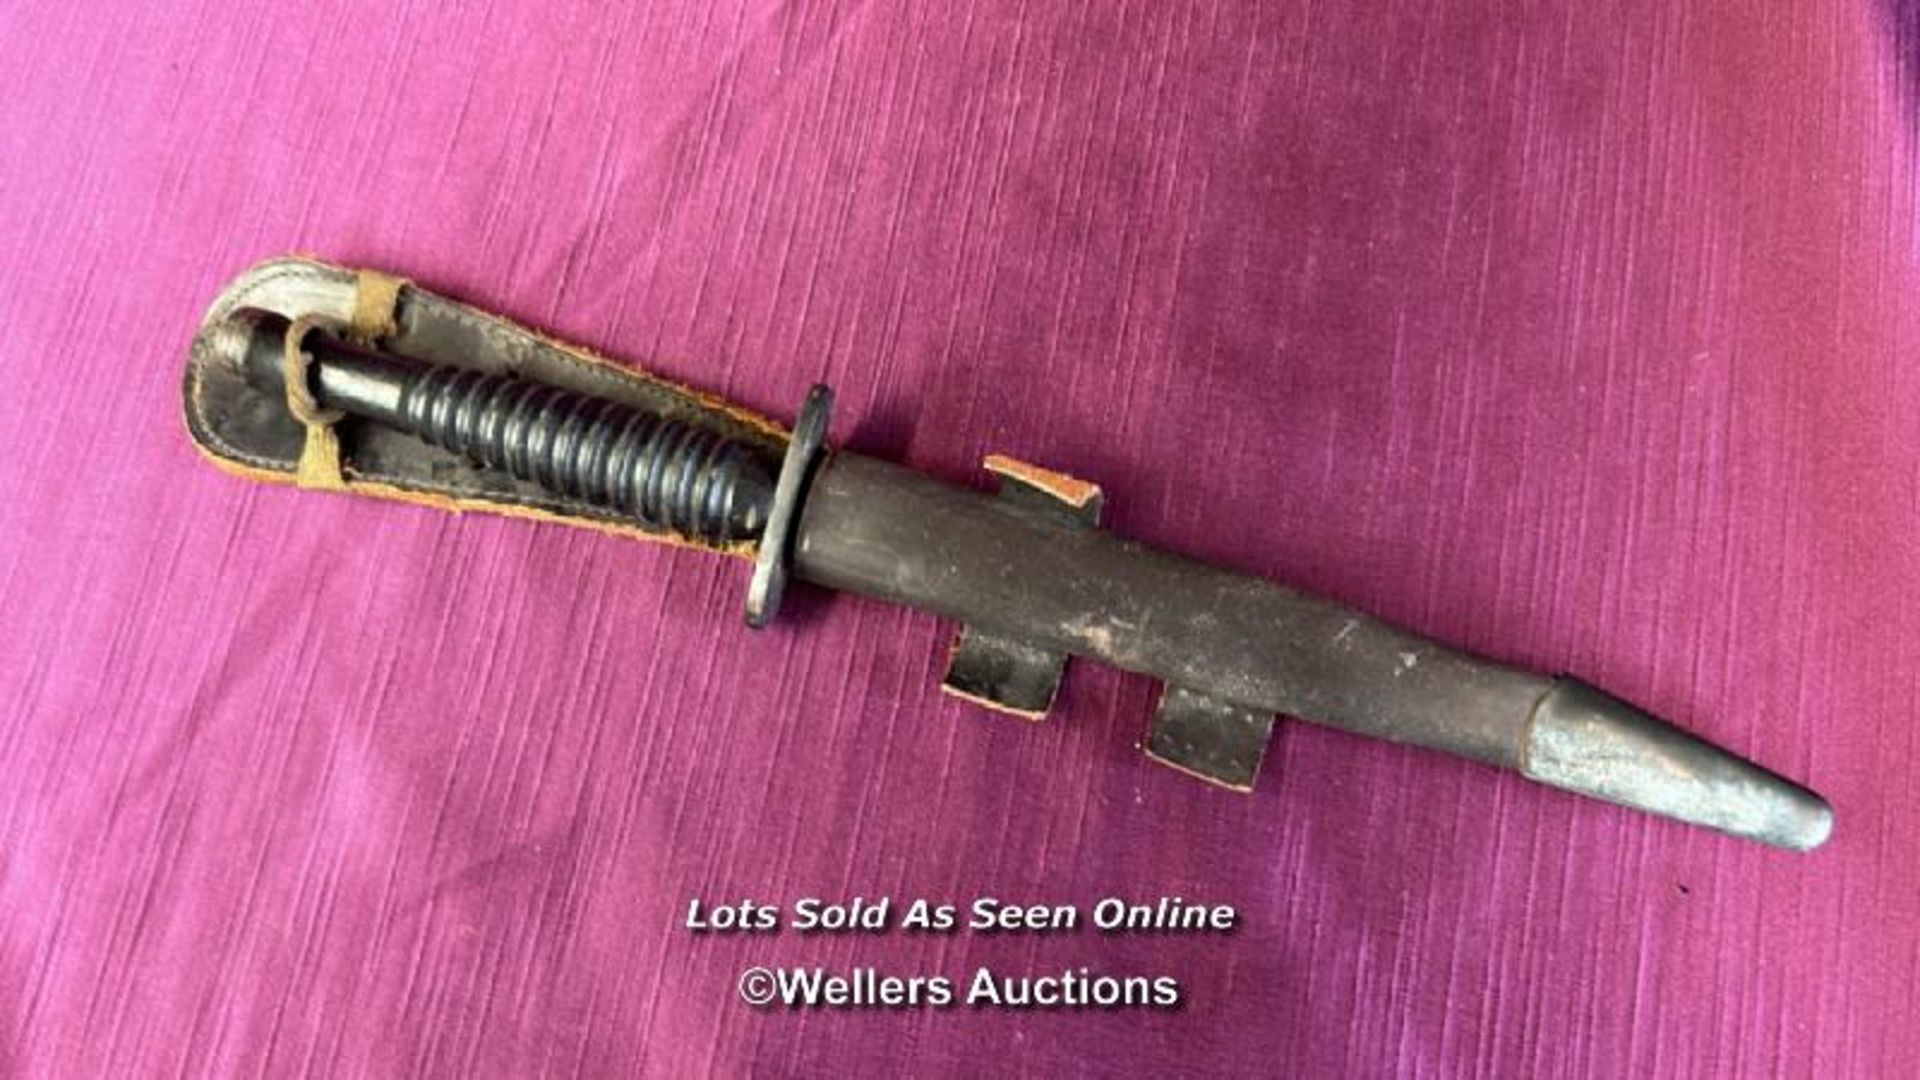 WORLD WAR TWO STYLE FAIRBAIRN-SYKES FIGHTING KNIFE WITH LEATHER SCABBARD, LENGTH 29CM - Image 6 of 6